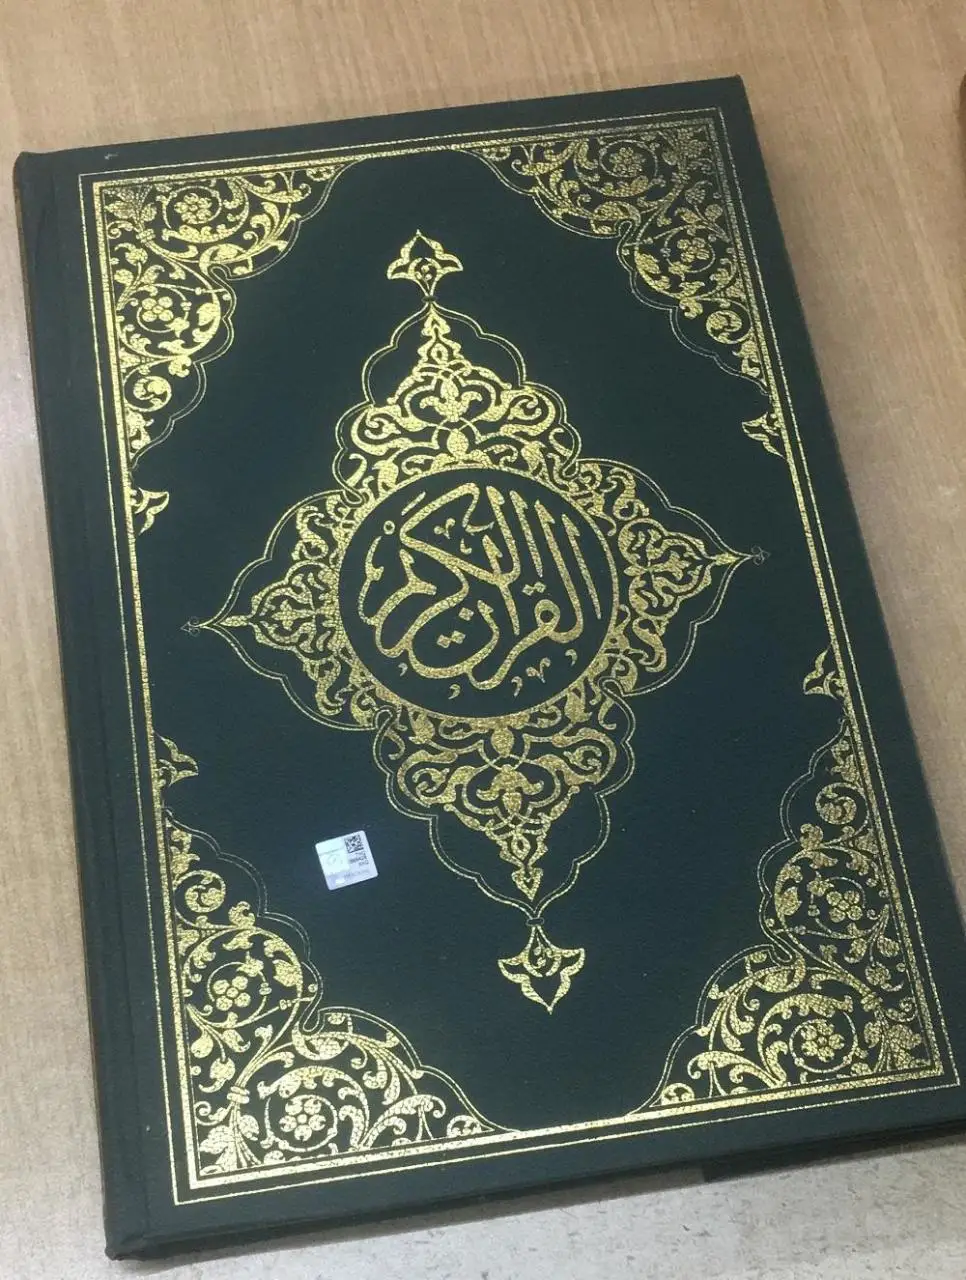 GREAT GIFT The Holy Quran, 28x40 cm. Mosque Kebir Size, The Largest Size Tahajjud Quran,   FREE SHİPPİNG